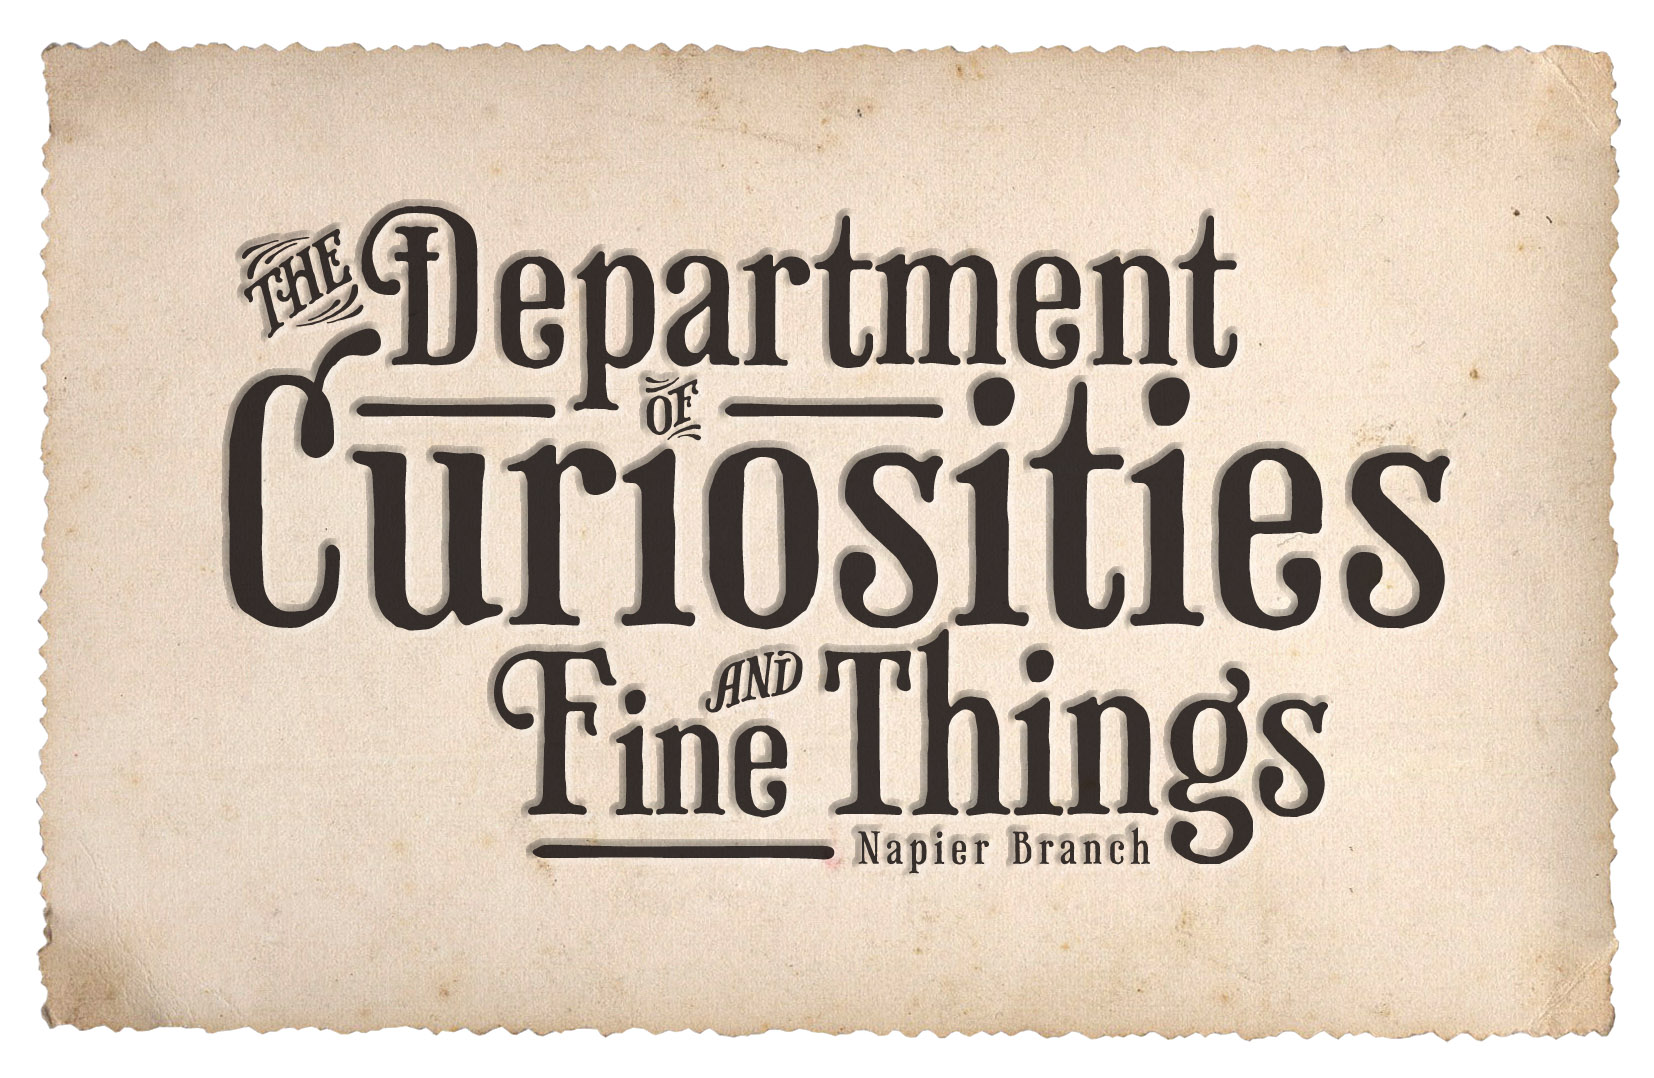 The Department of Curiosities and Fine Things